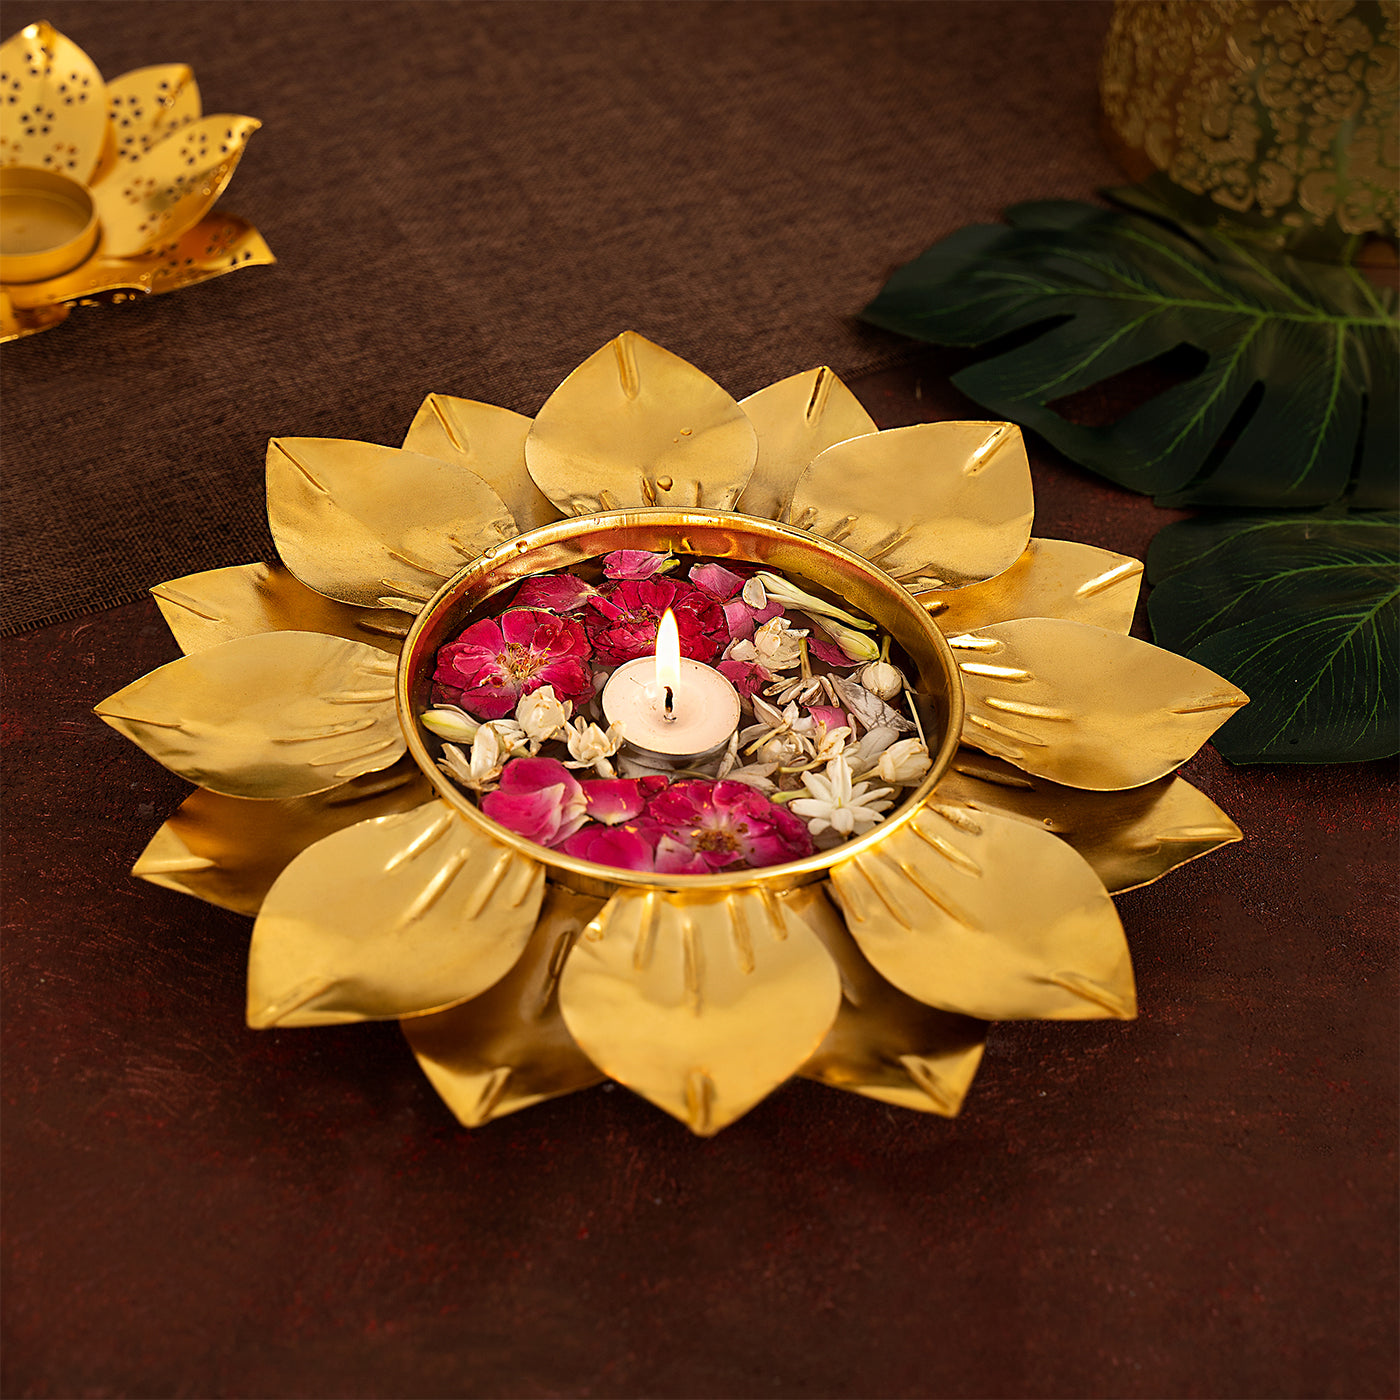 Handcrafted Lotus Urli For Home, Office and Table Decor